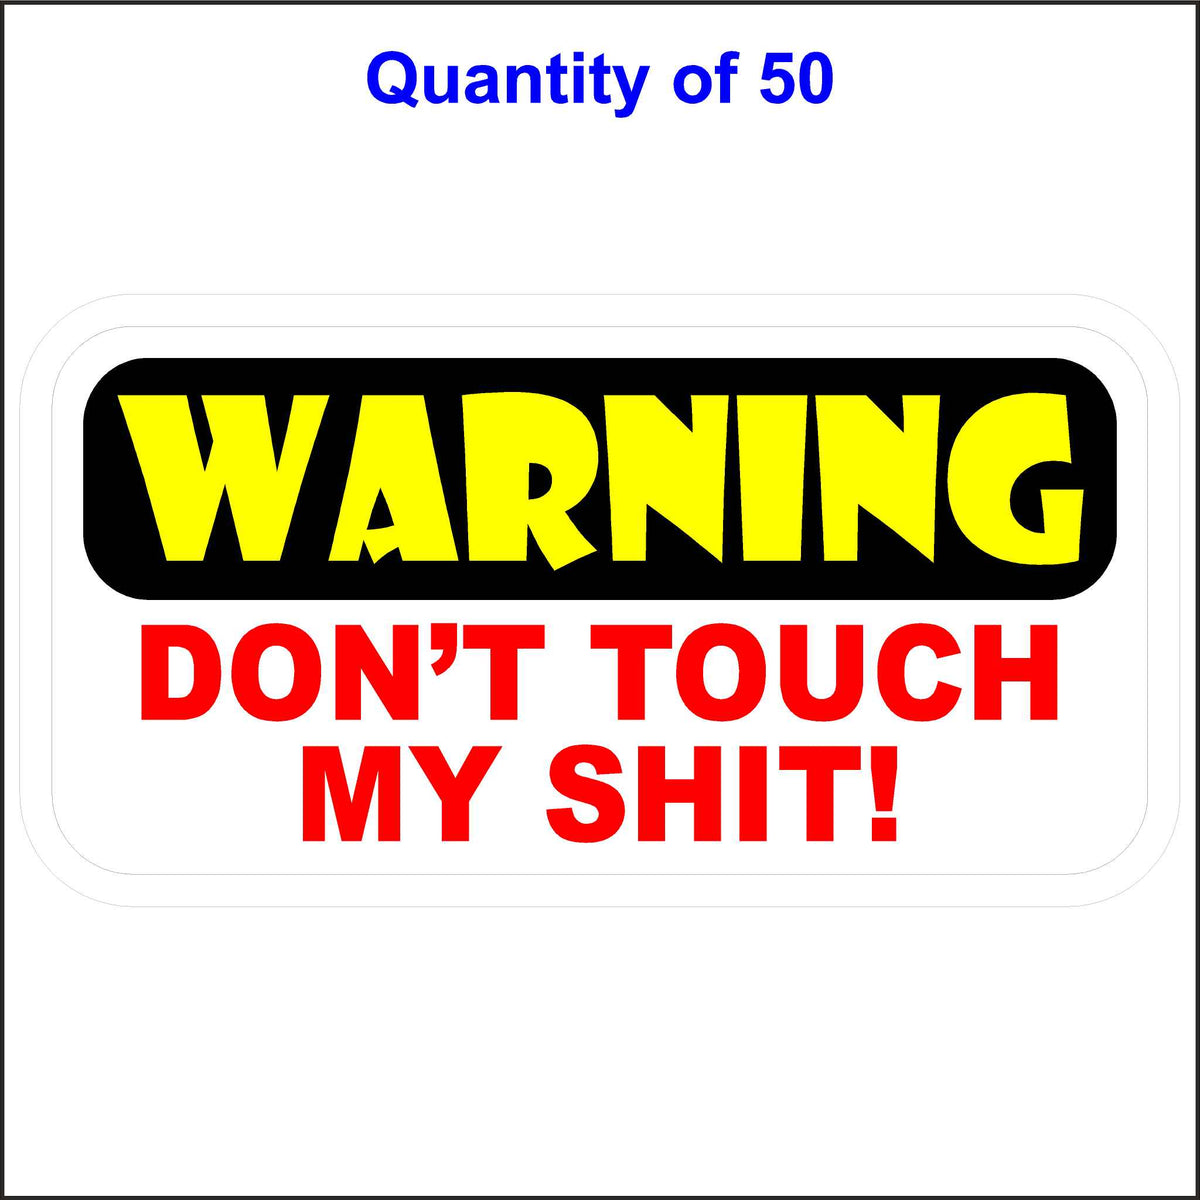 Warning Don&#39;t Touch My Shit Sticker. 50 Quantity.